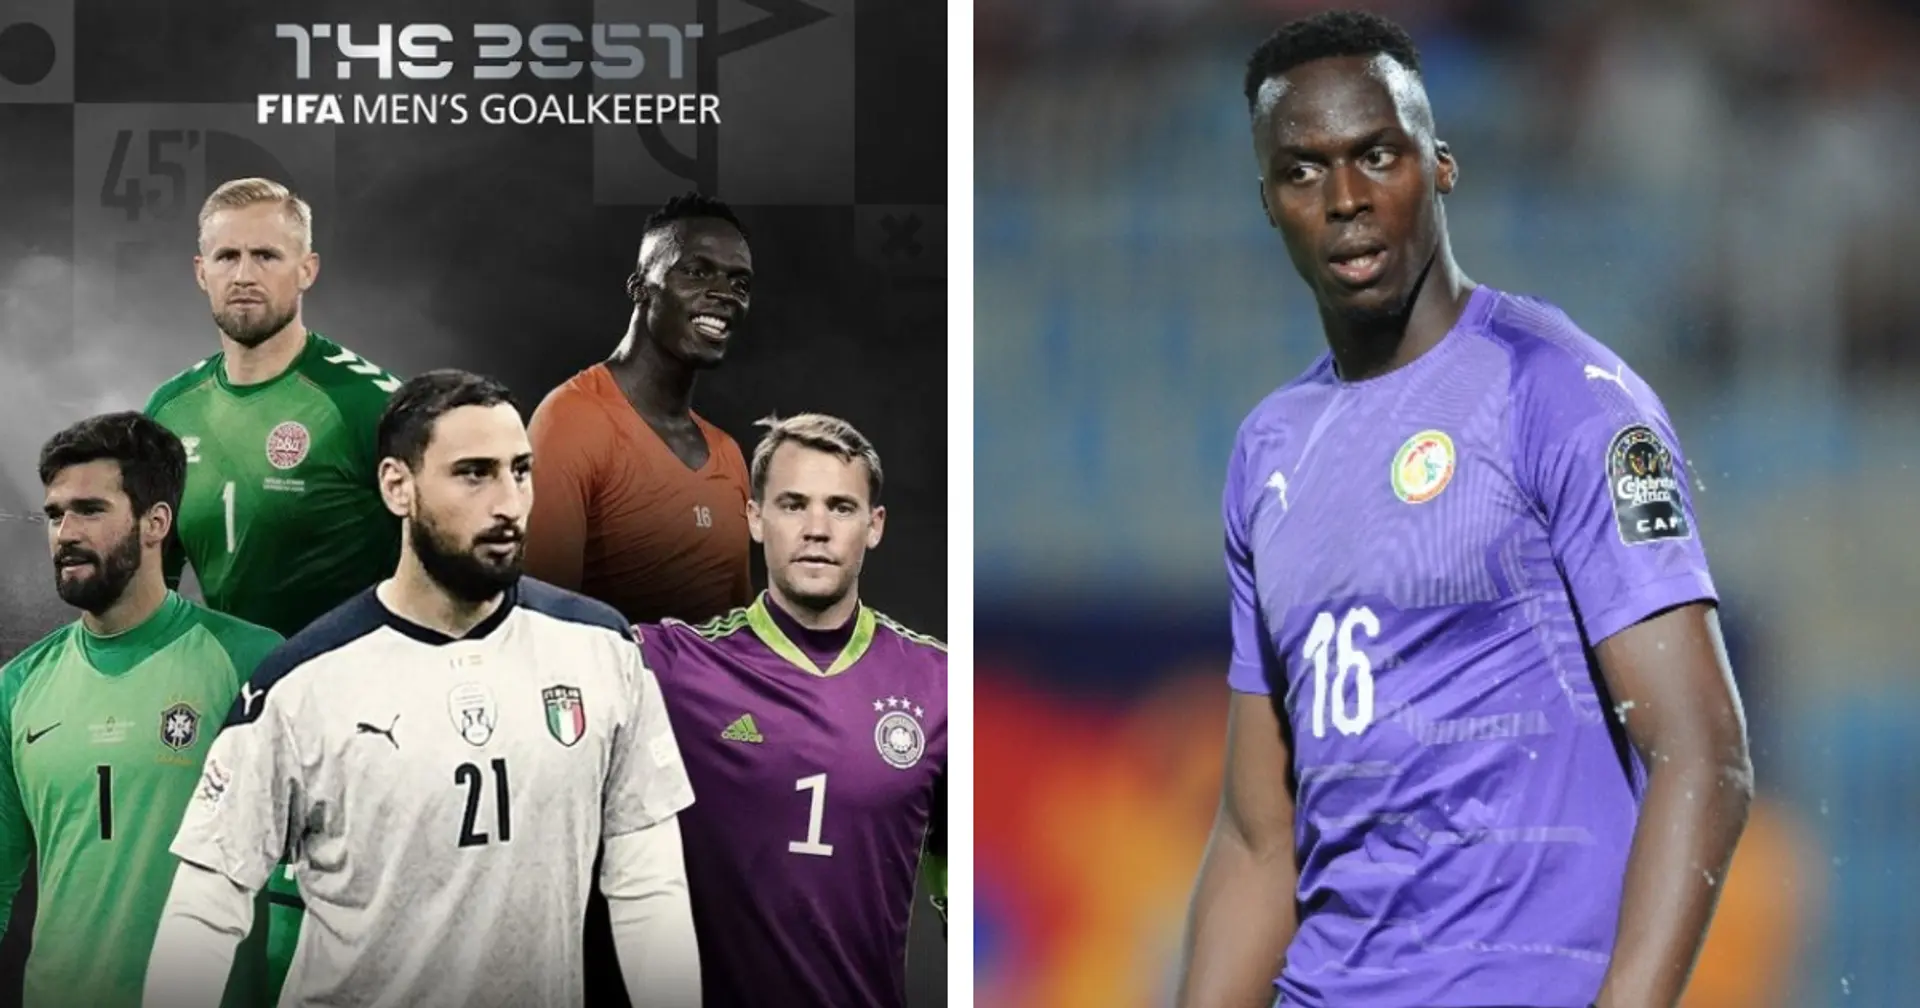 'Is it normal?': Edouard Mendy calls out FIFA for excluding Senegal jersey in official photo